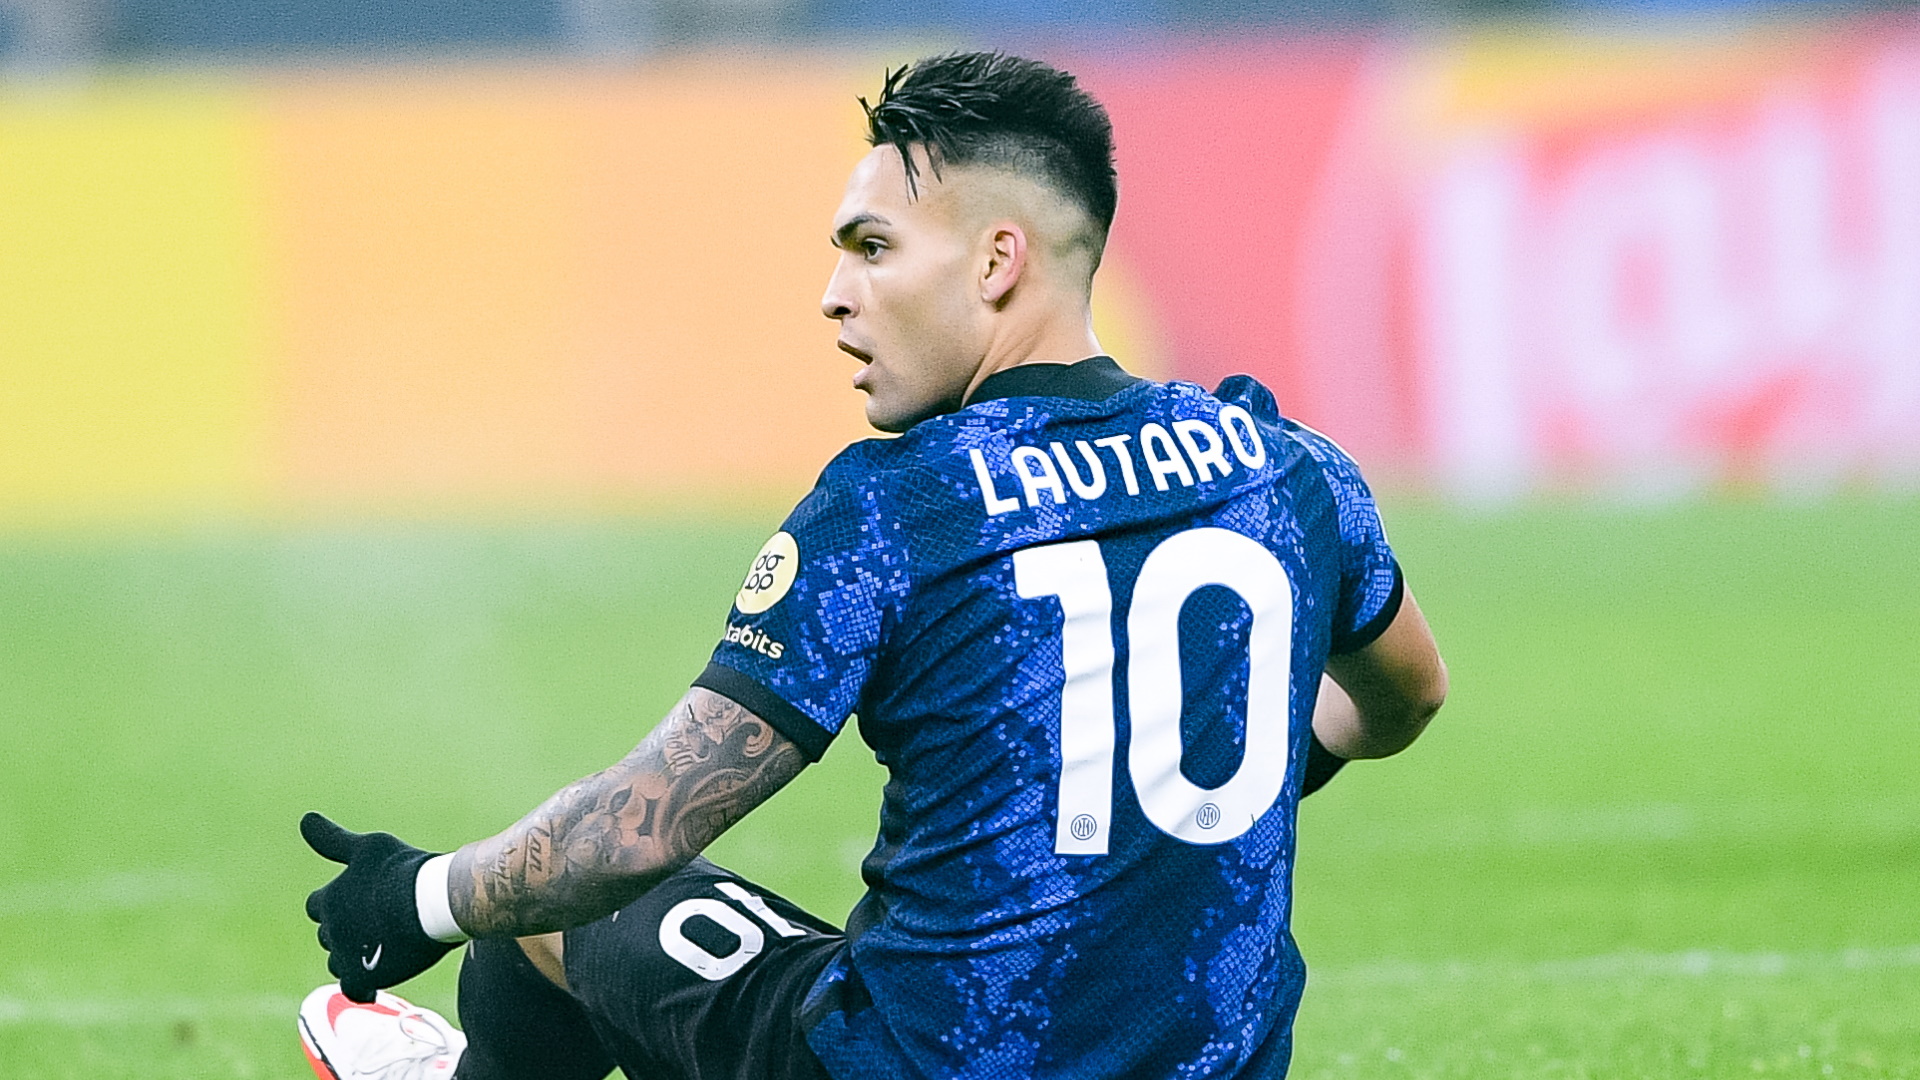 Lautaro Martinez probably won’t pen his new Inter contract before Christmas, but it could happen shortly thereafter, by January 6th.